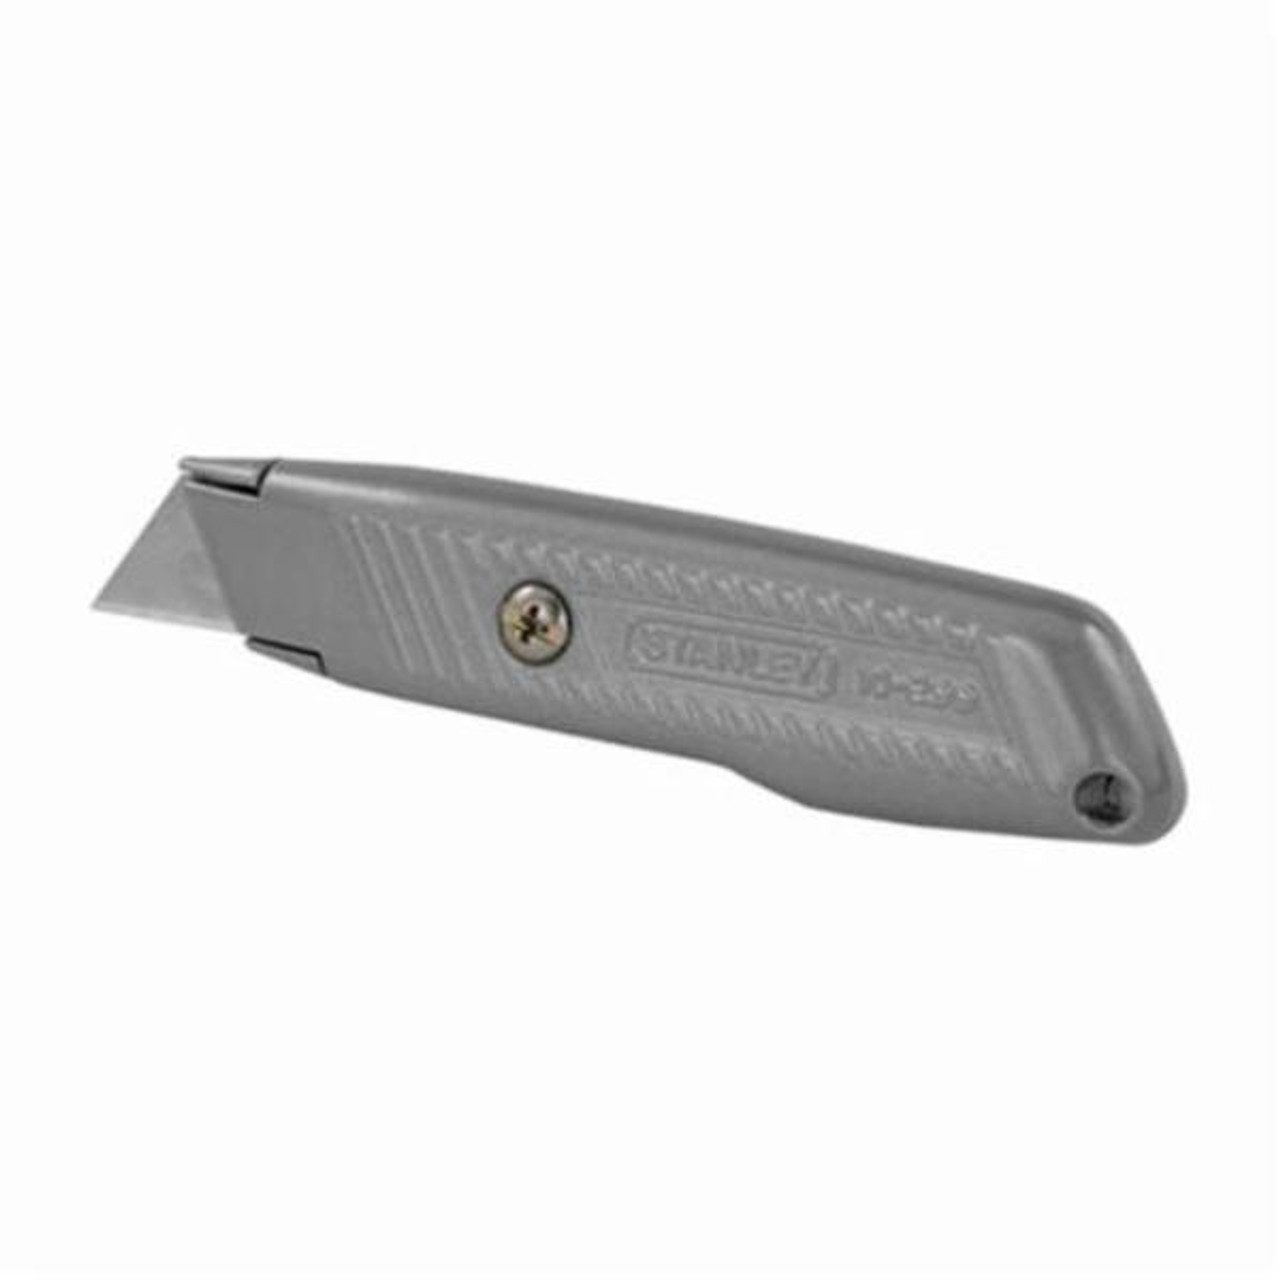 Stanley Dynagrip Retractable Utility Knife